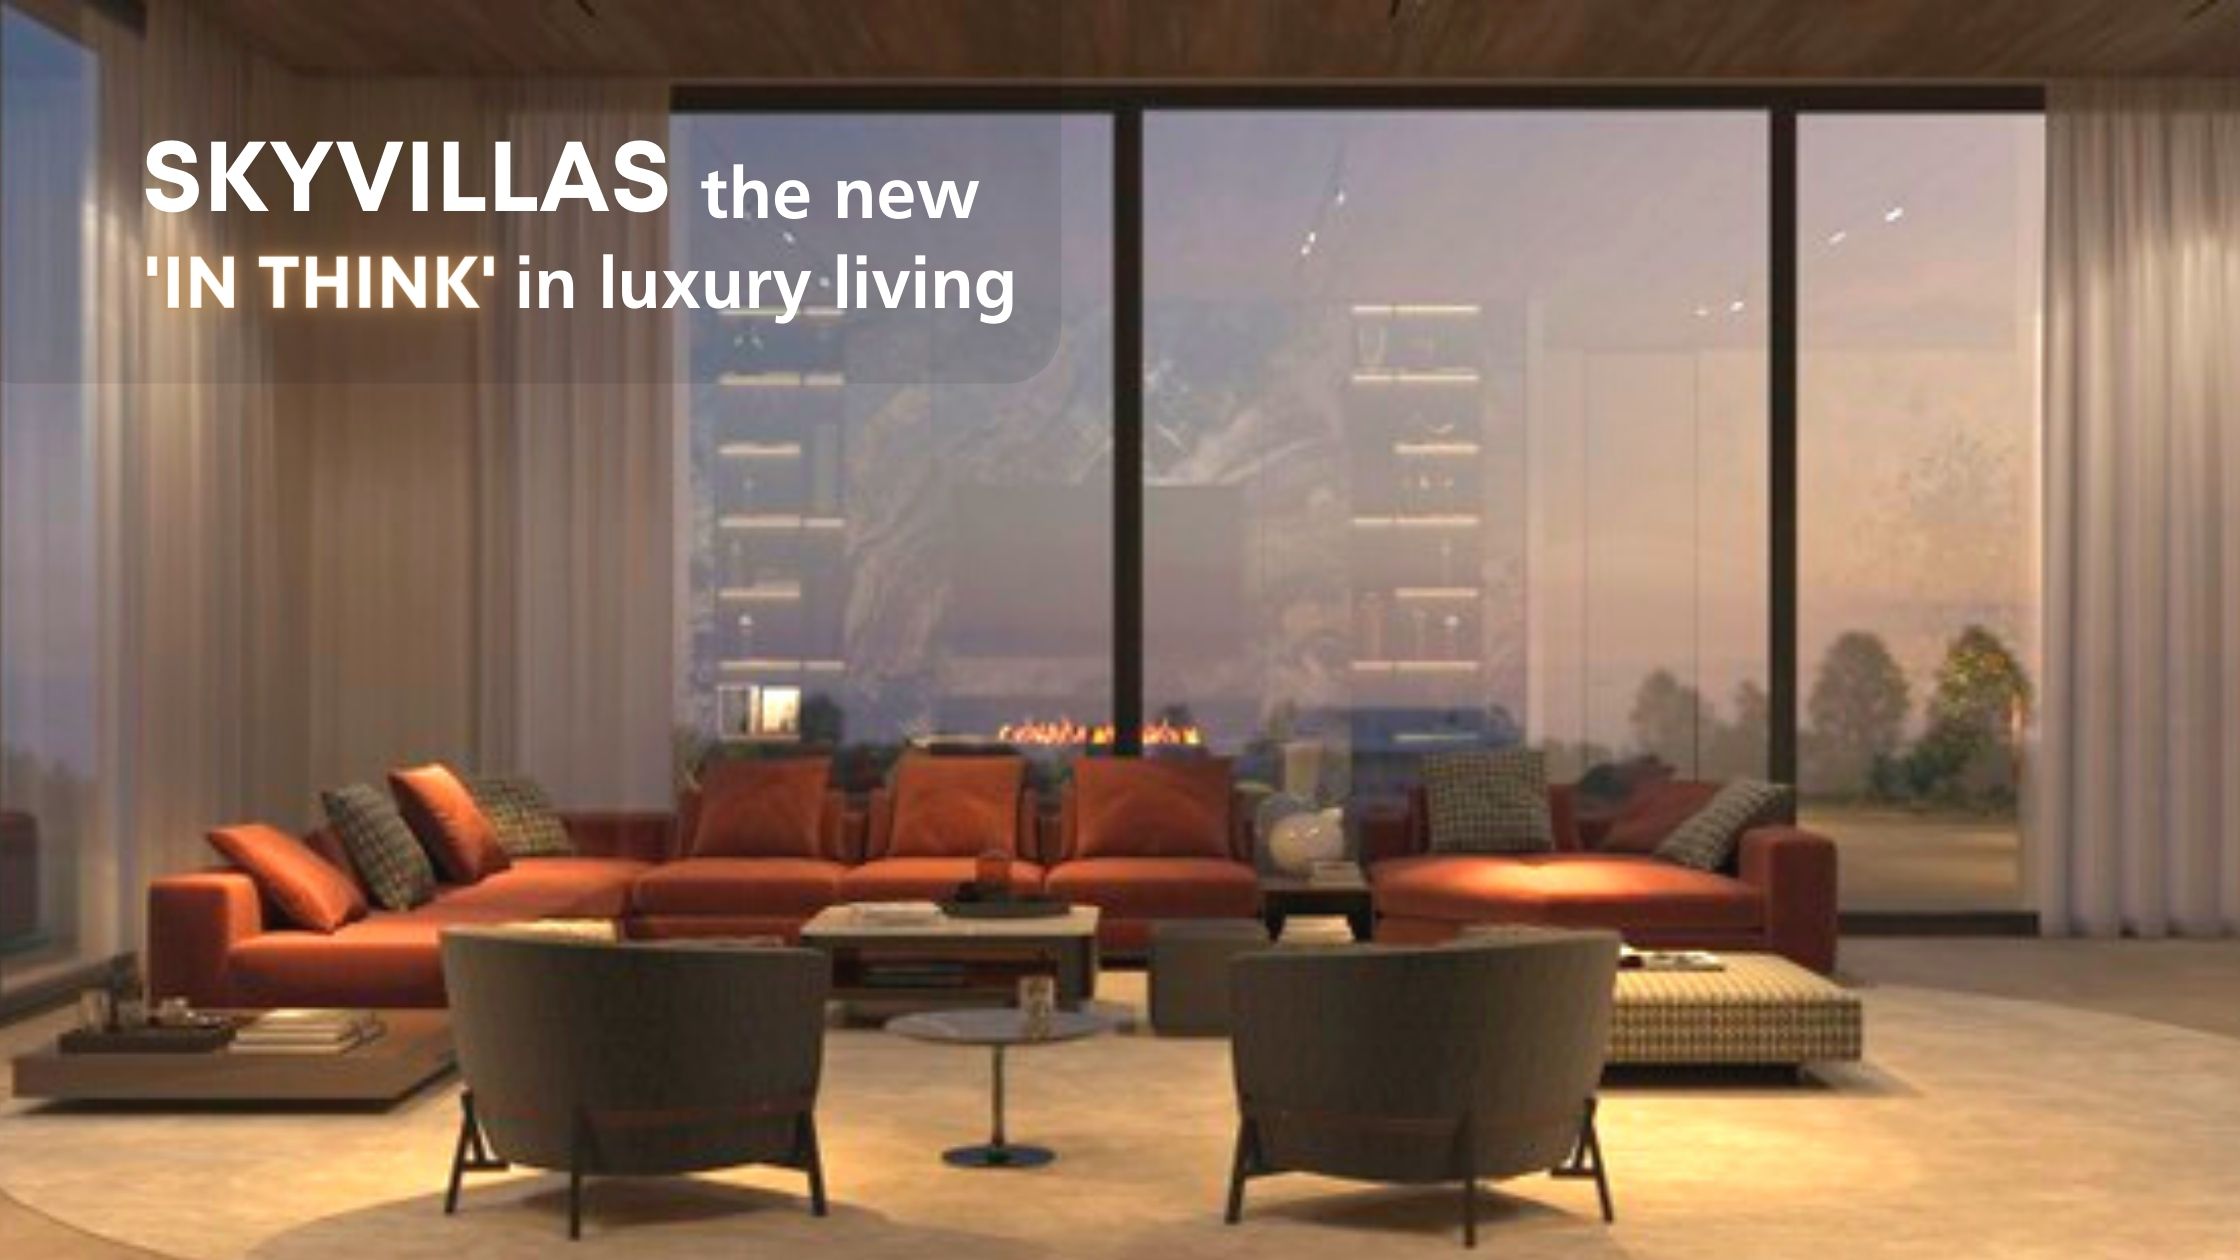 Sky villas – the New ‘in thing’ in luxury living